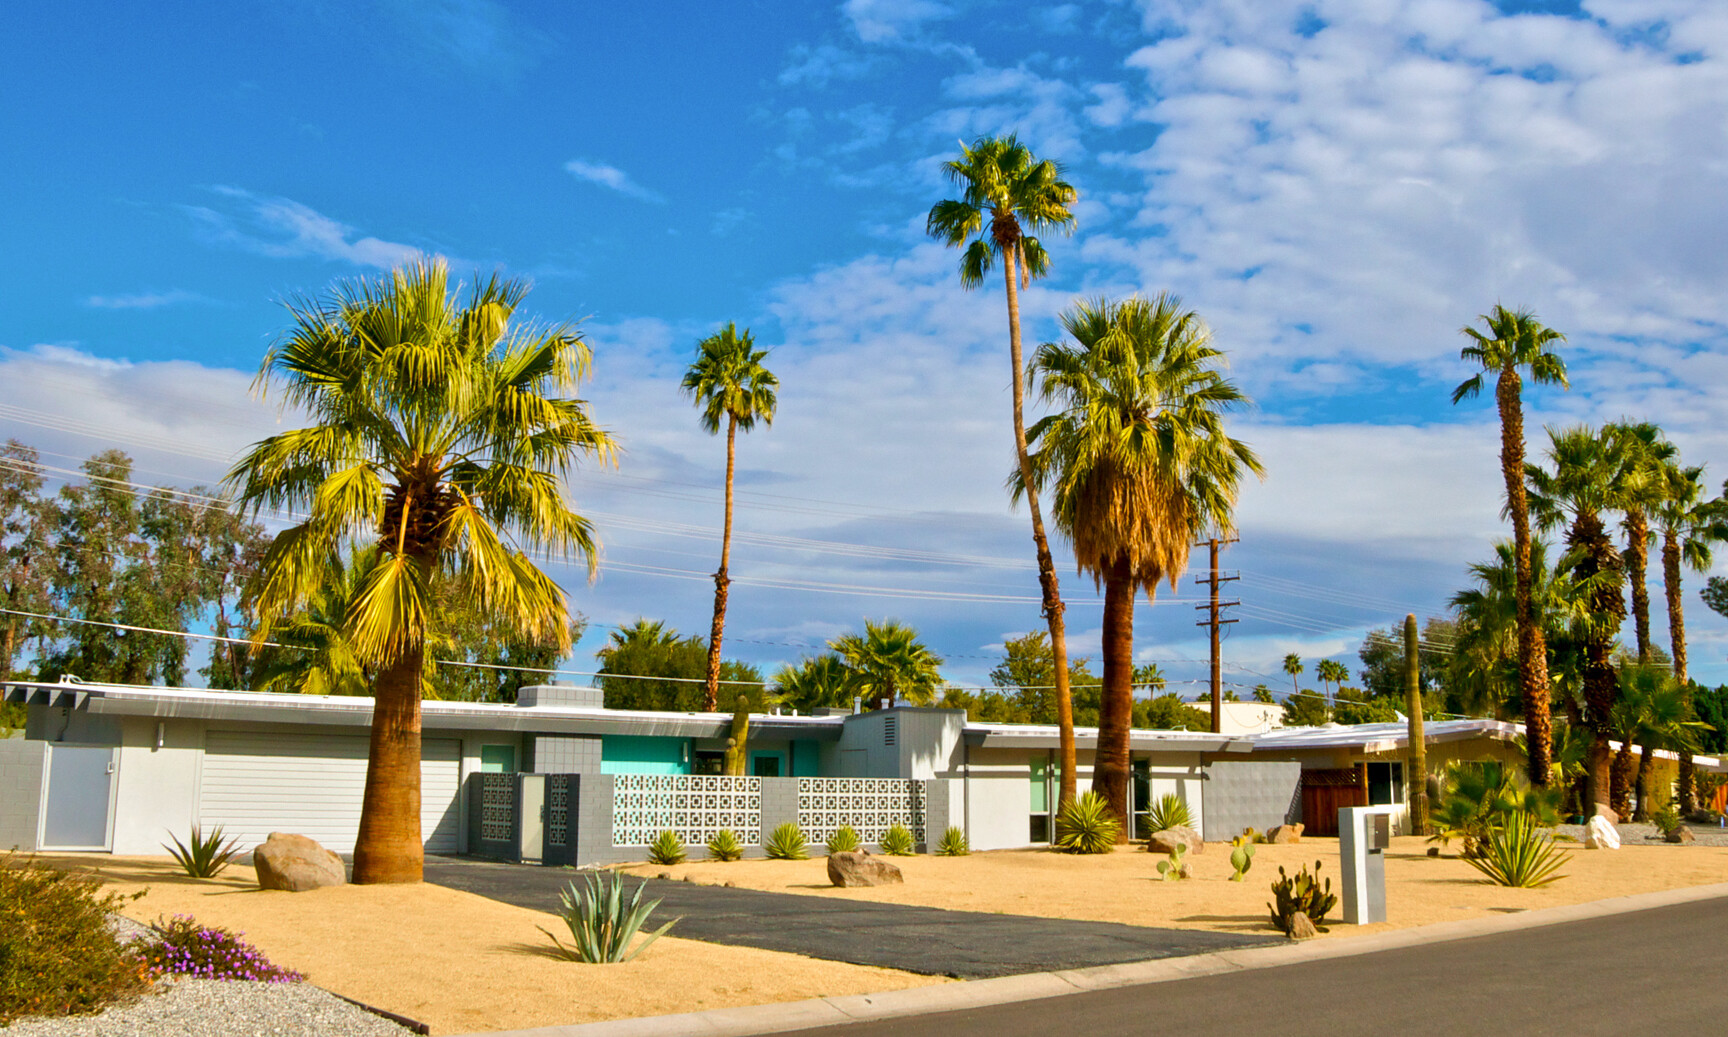 Top 5 Places to Take Photos in Palm Desert